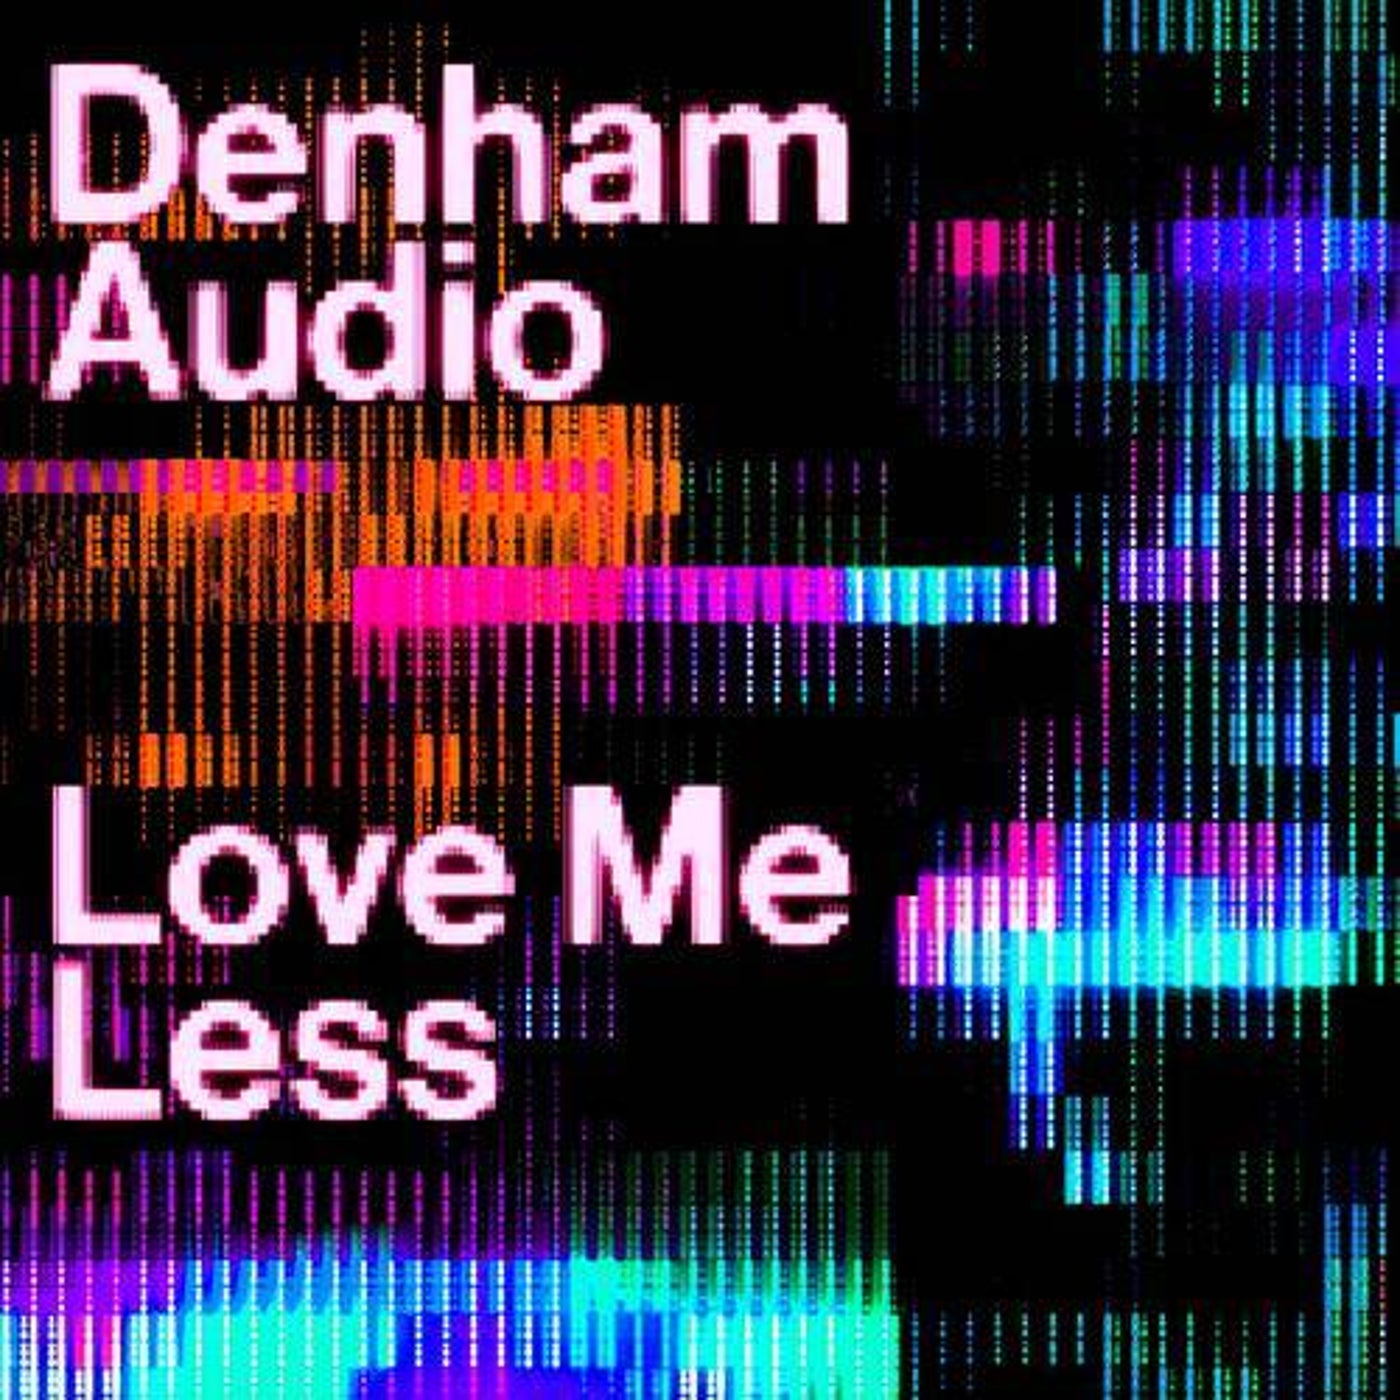 Love Me Less (Extended)